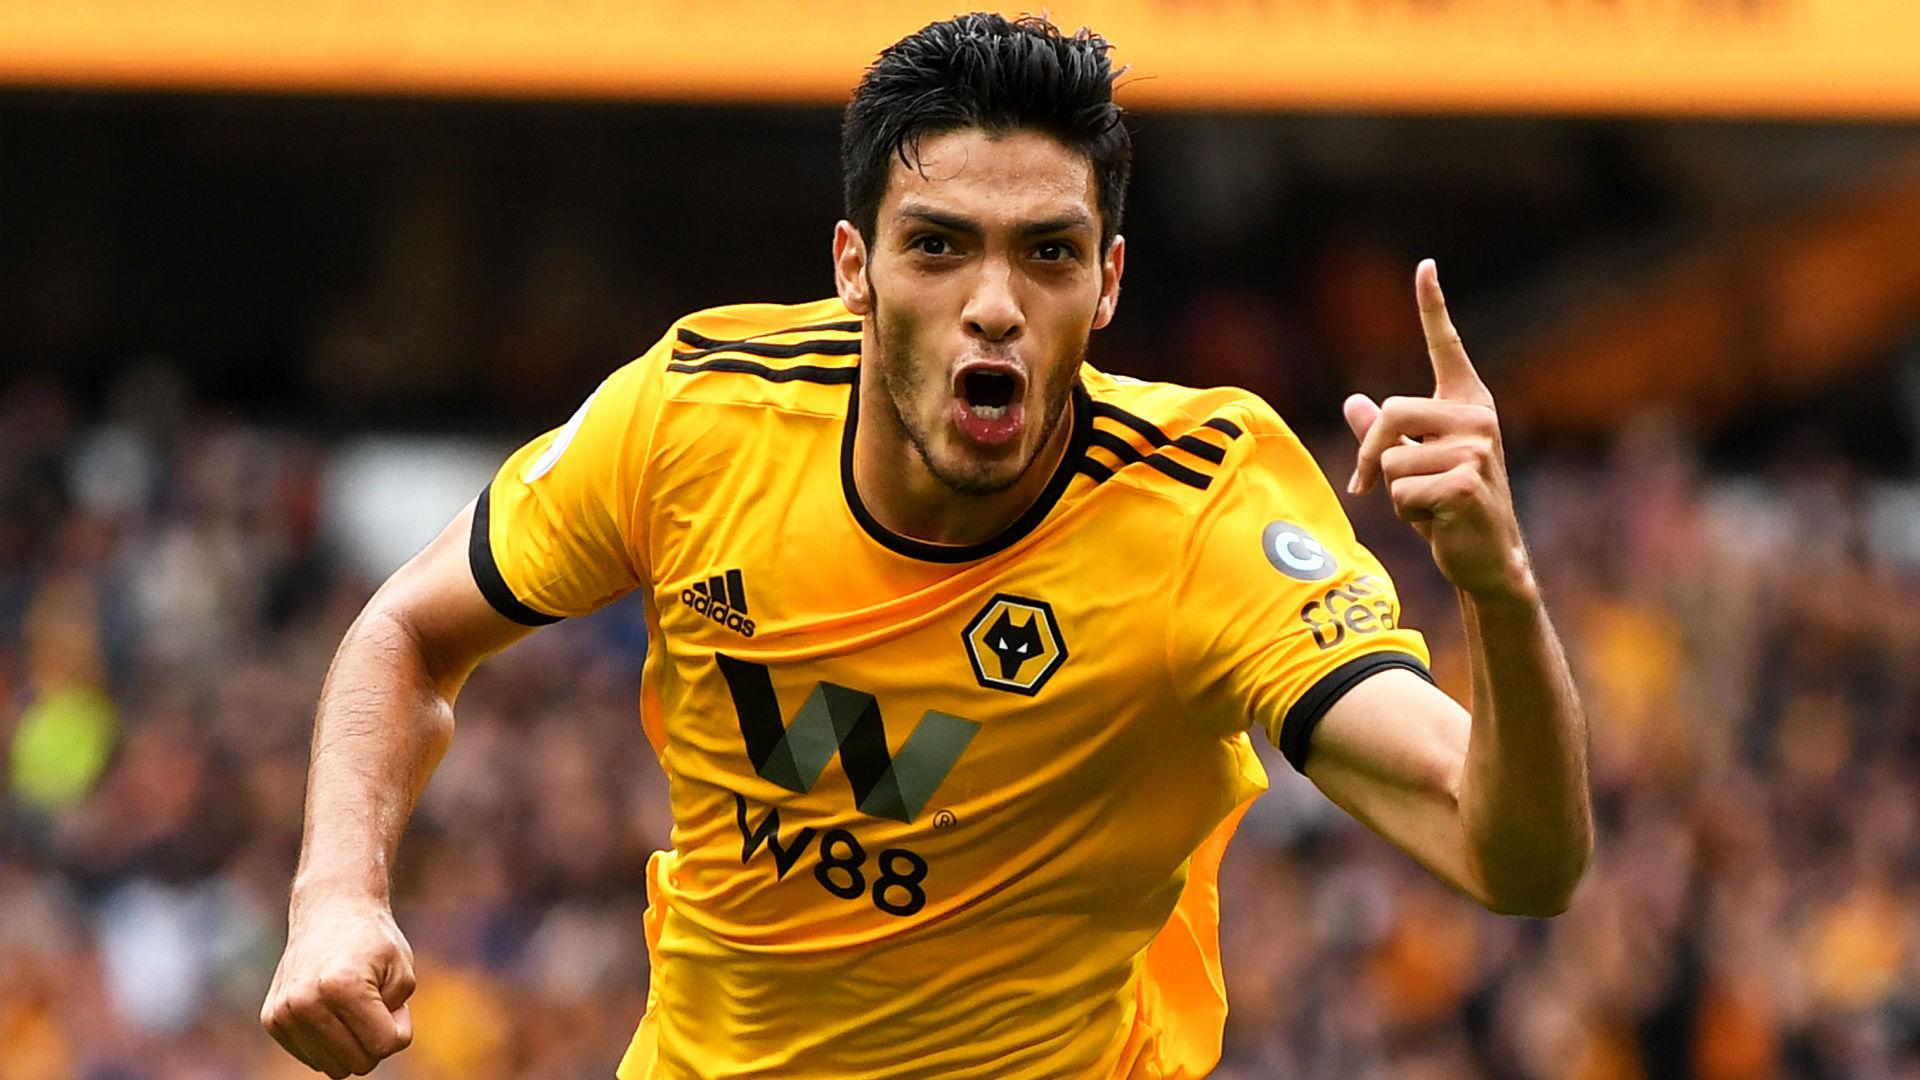 Raul Jimenez Wolves signing: Mexico international is a €38m